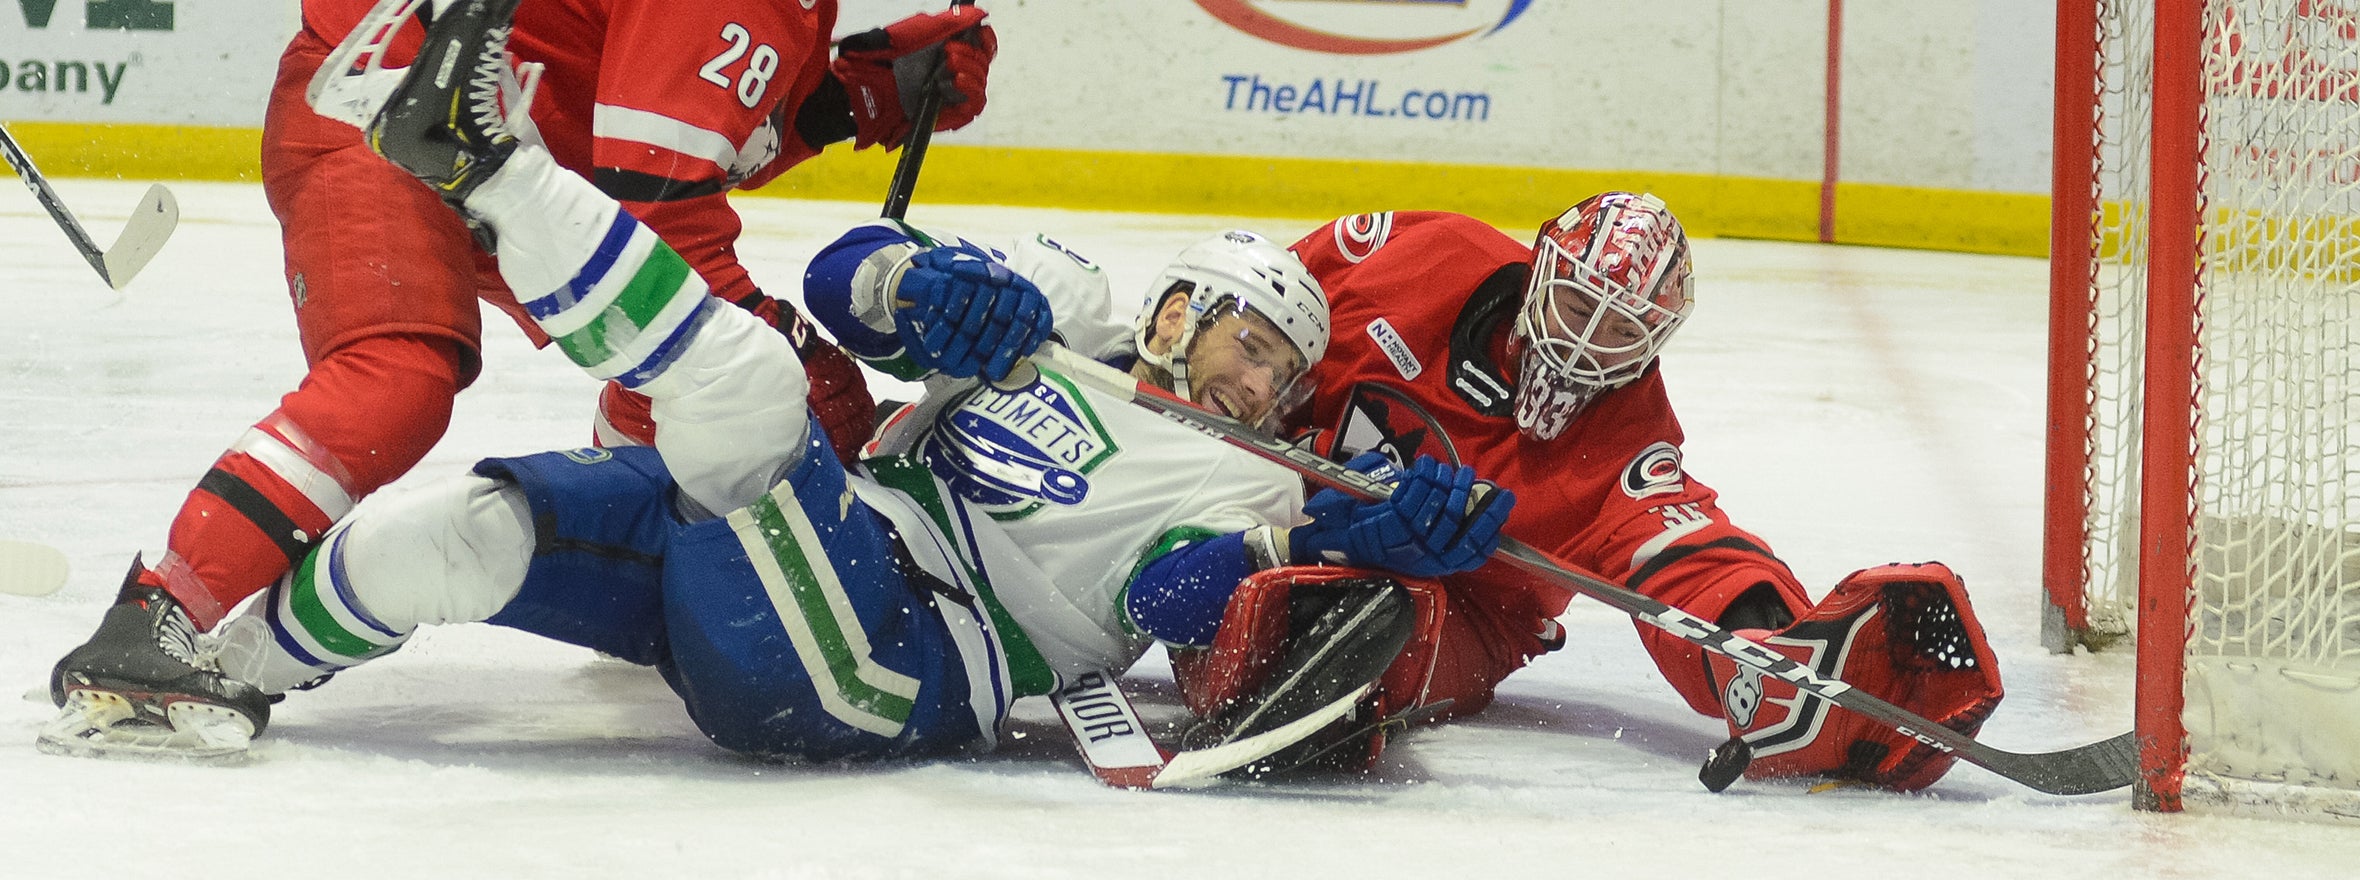 COMETS STIFLED BY CHARLOTTE DEFENSE